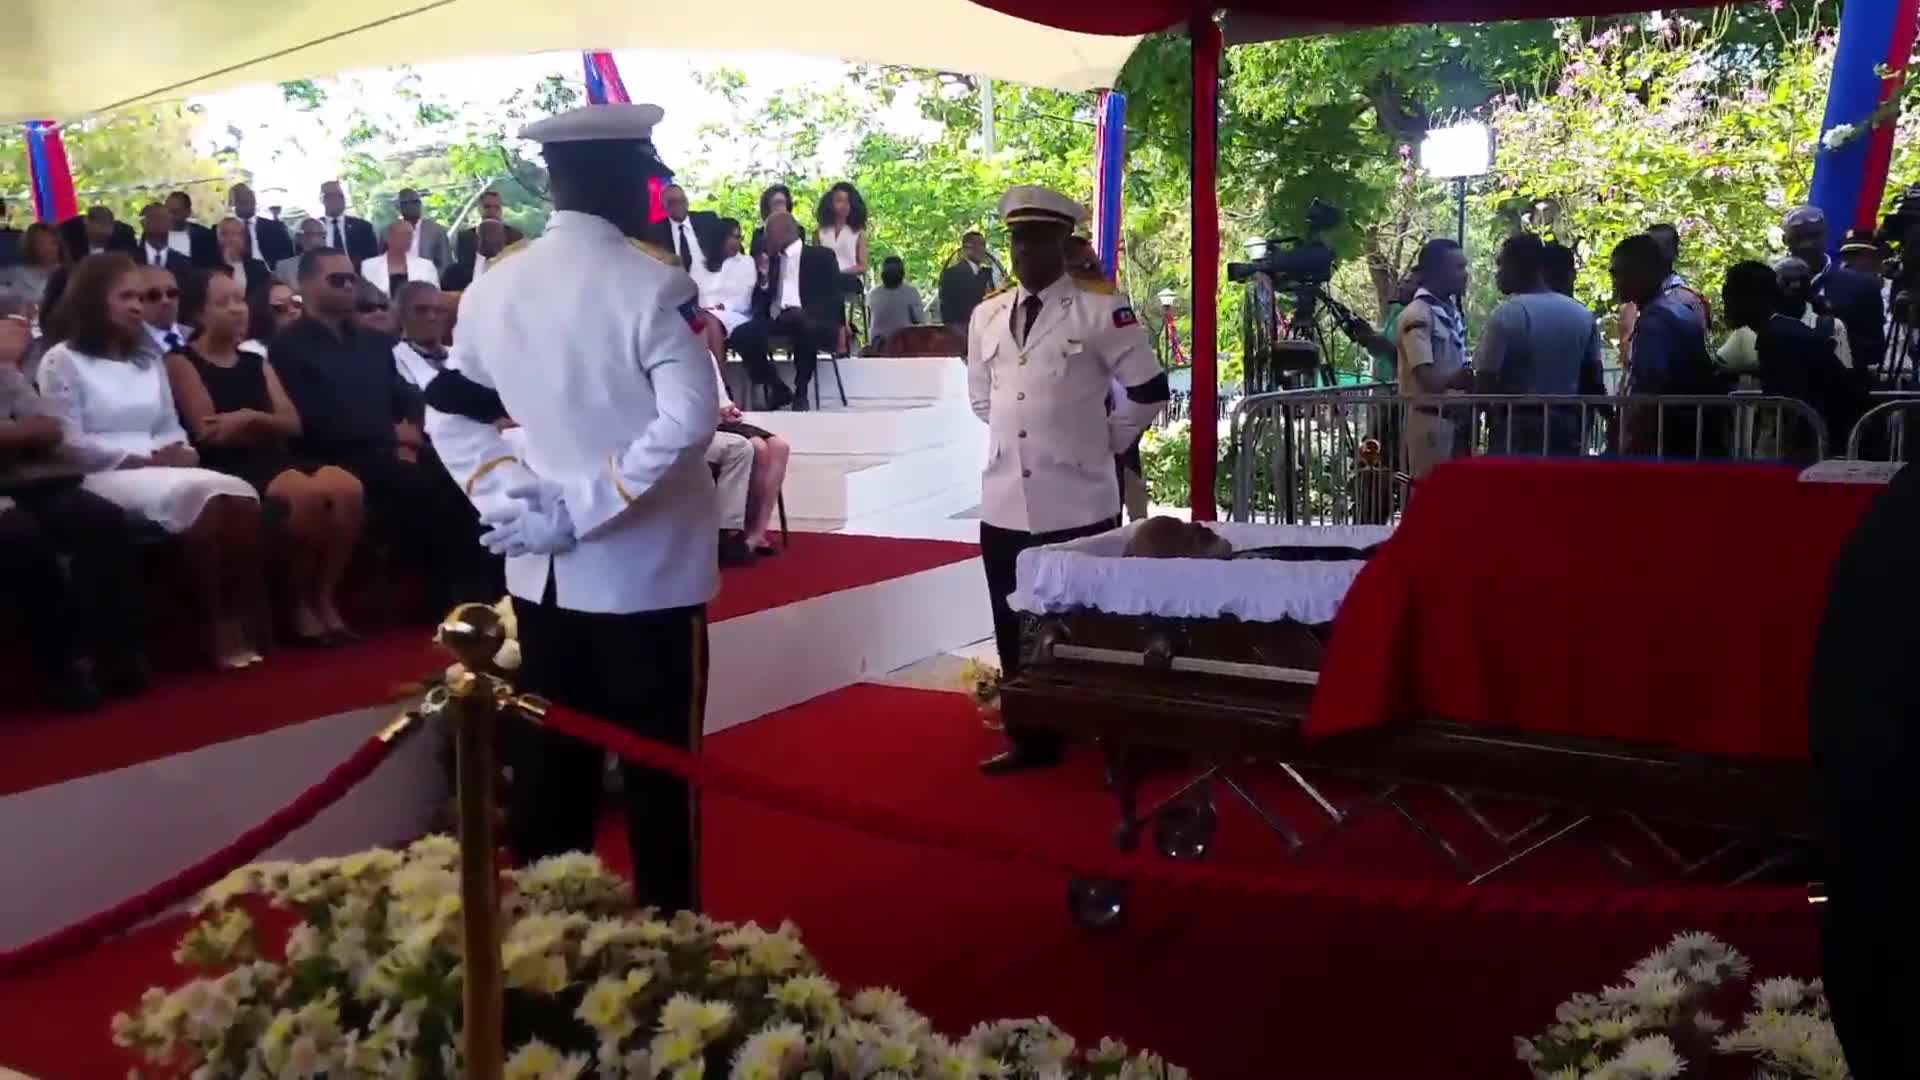 Thousands gather to mourn former Haitian president Preval